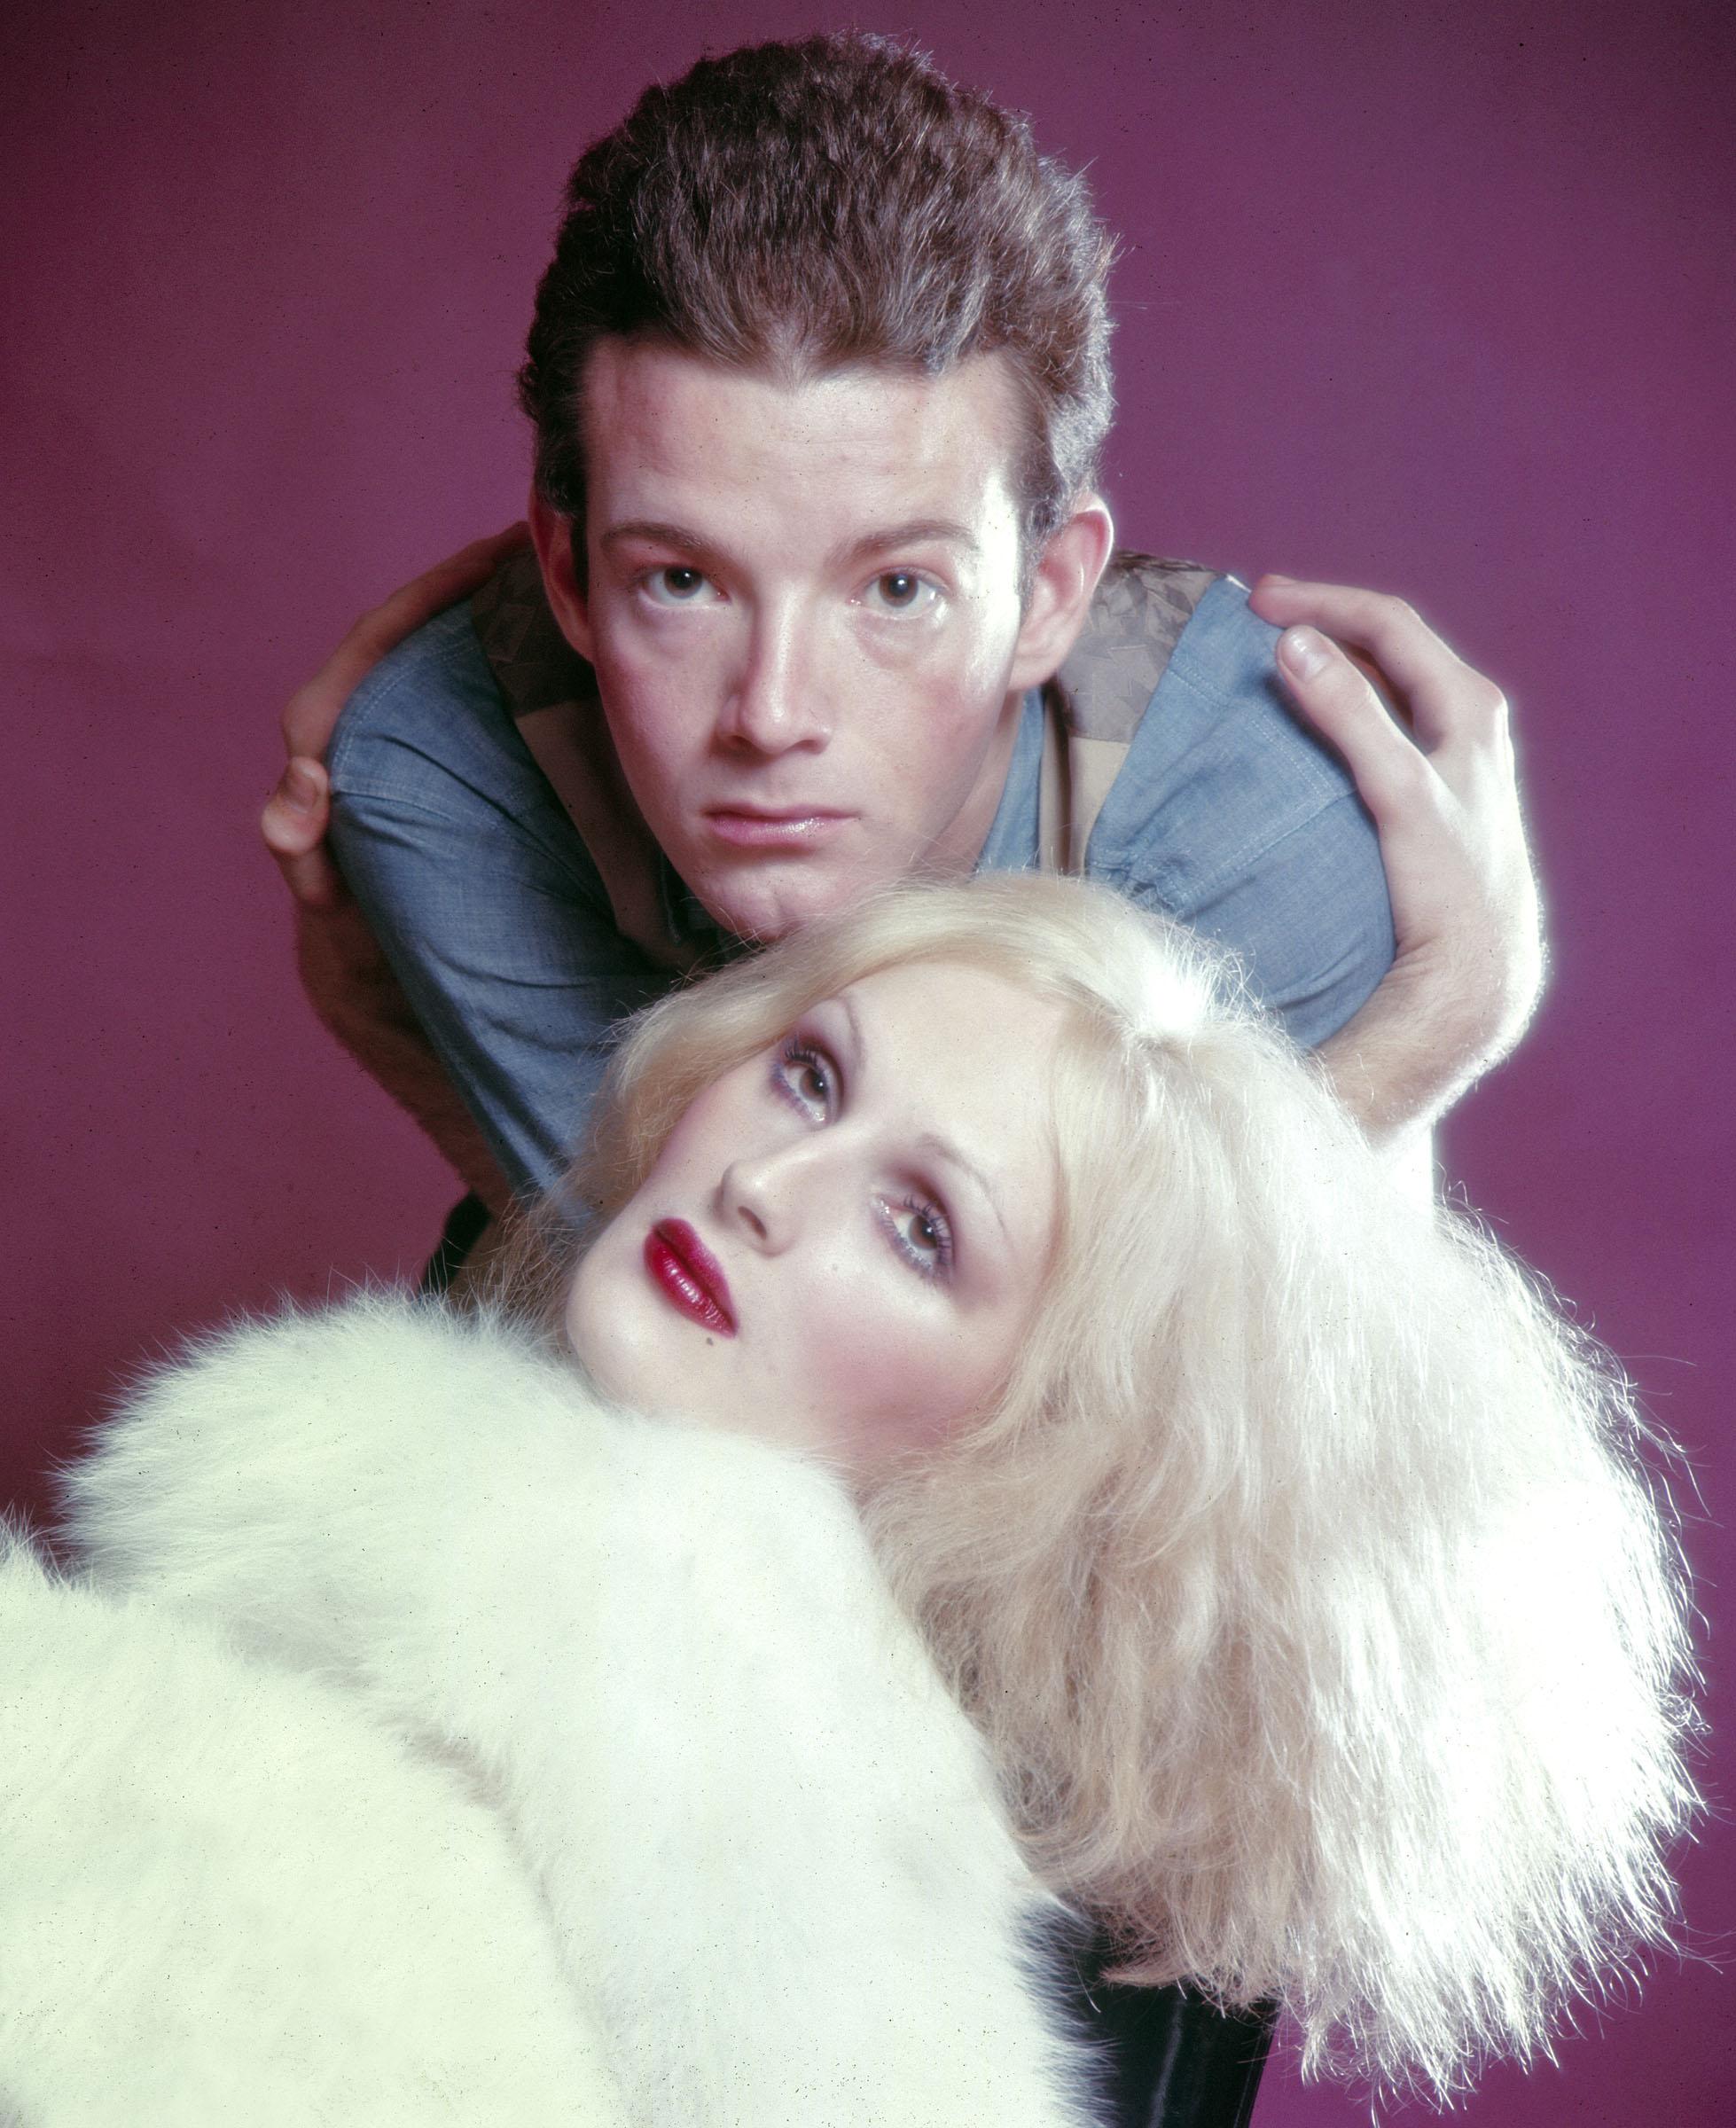 Jack Mitchell Color Photograph - Warhol Superstars Jackie Curtis & Candy Darling 'Vain Victory', Color 17 x 22" 